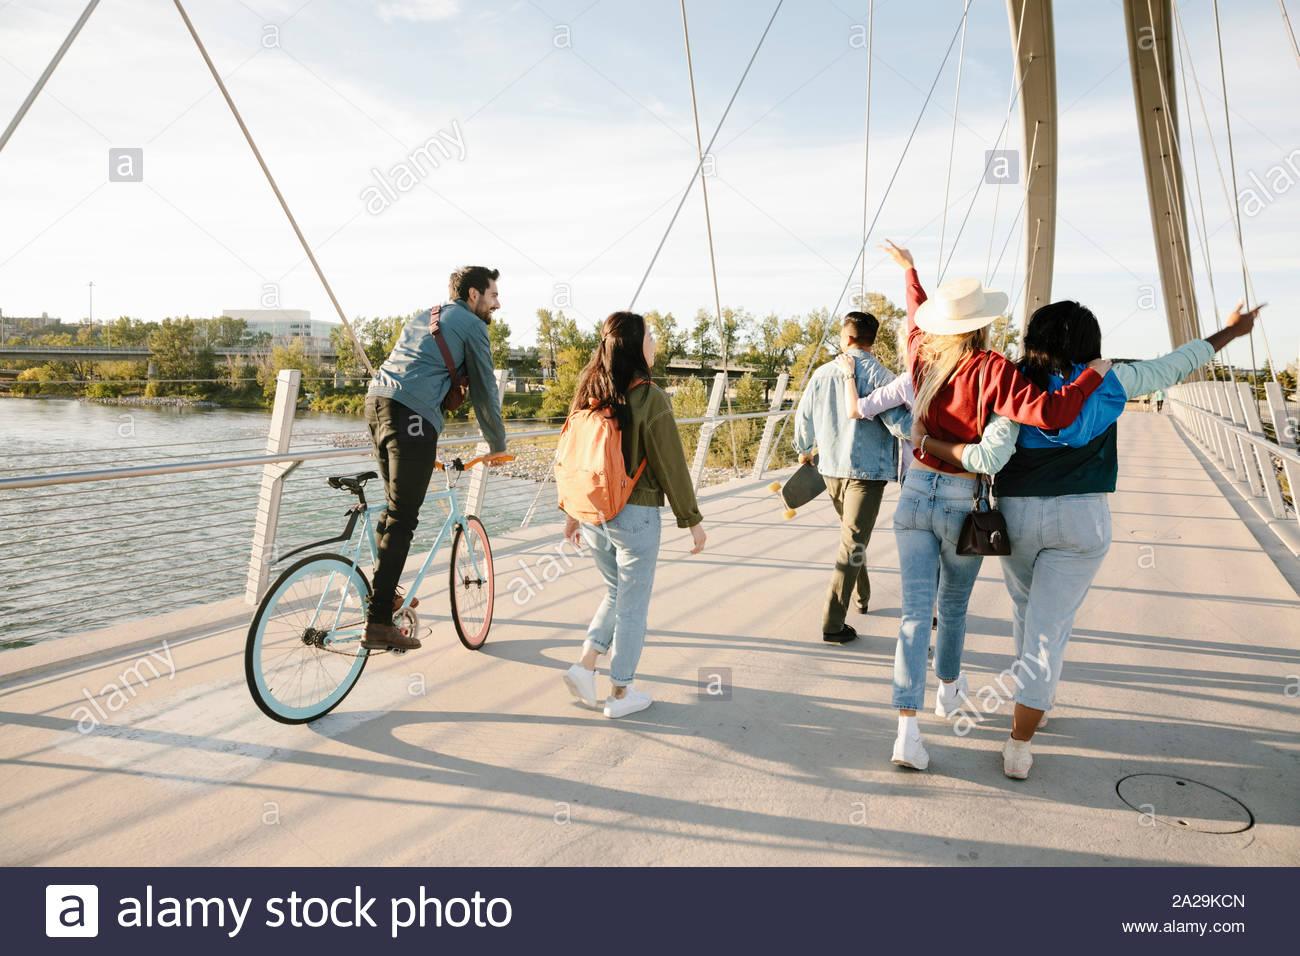 Playful young adult friends on sunny, urban footbridge Stock Photo